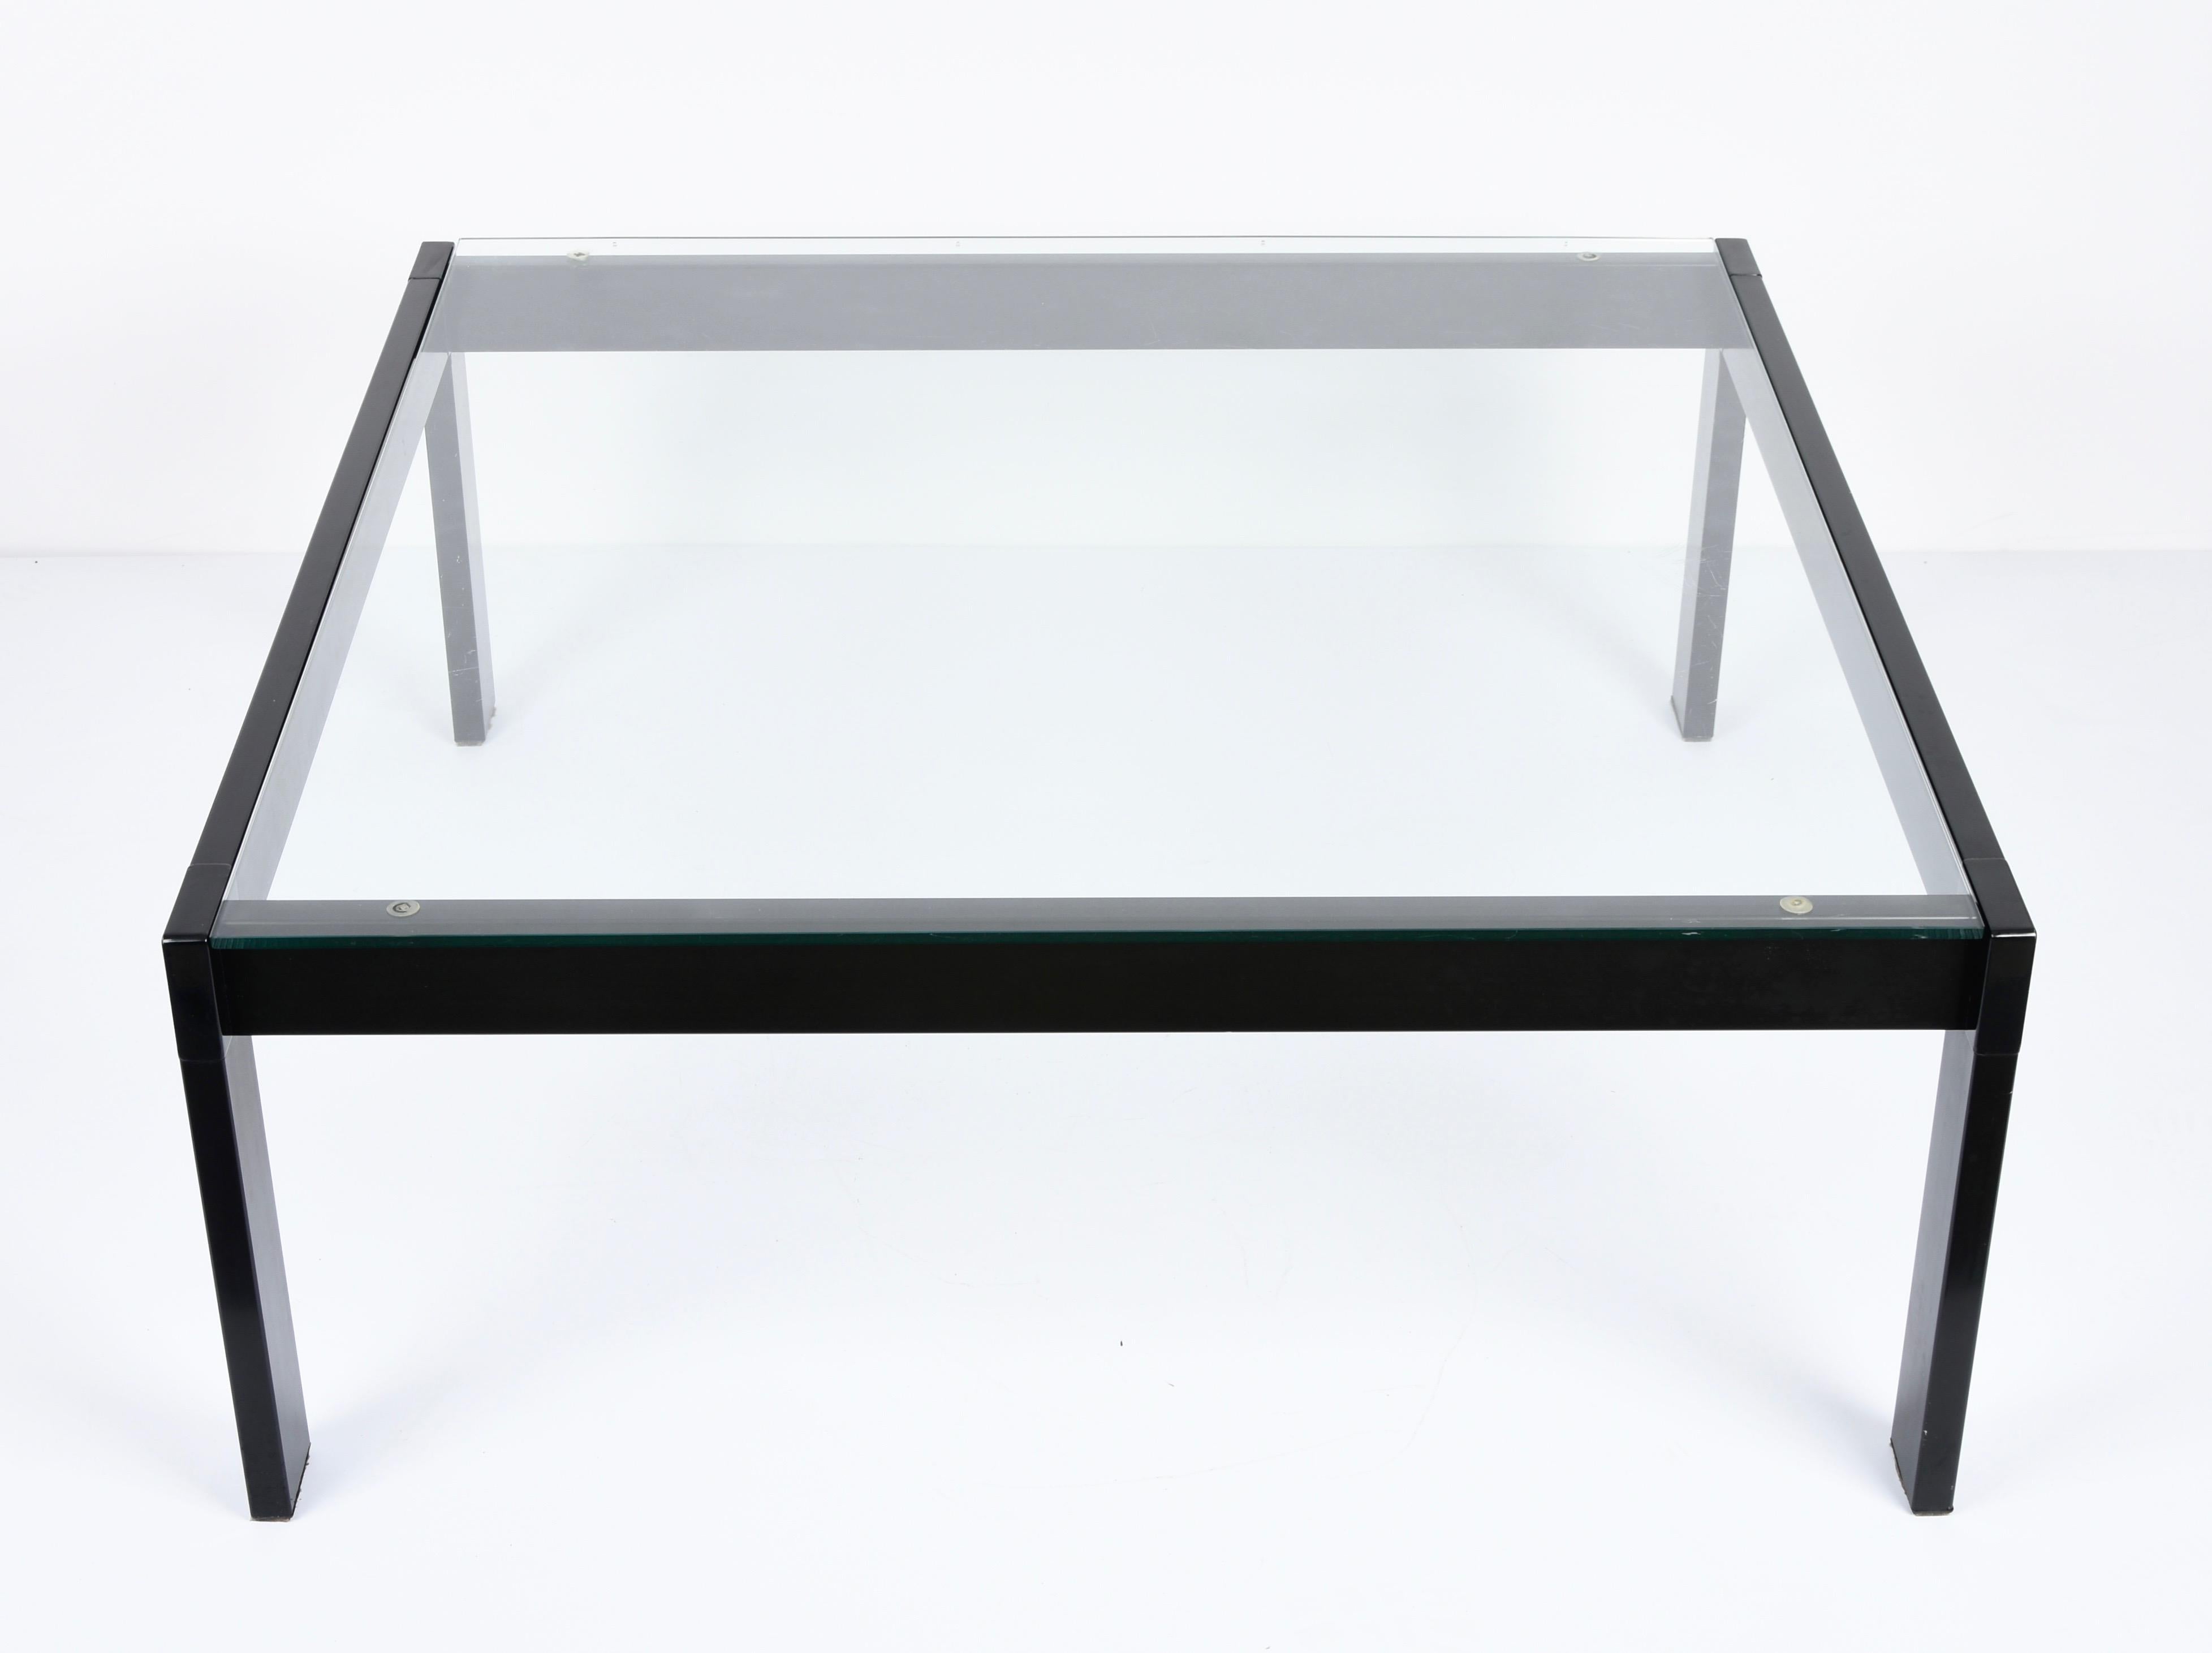 Late 20th Century Gae Aulenti Glass and Enamelled Black Metal Italian Coffee Table, Zanotta, 1970s For Sale